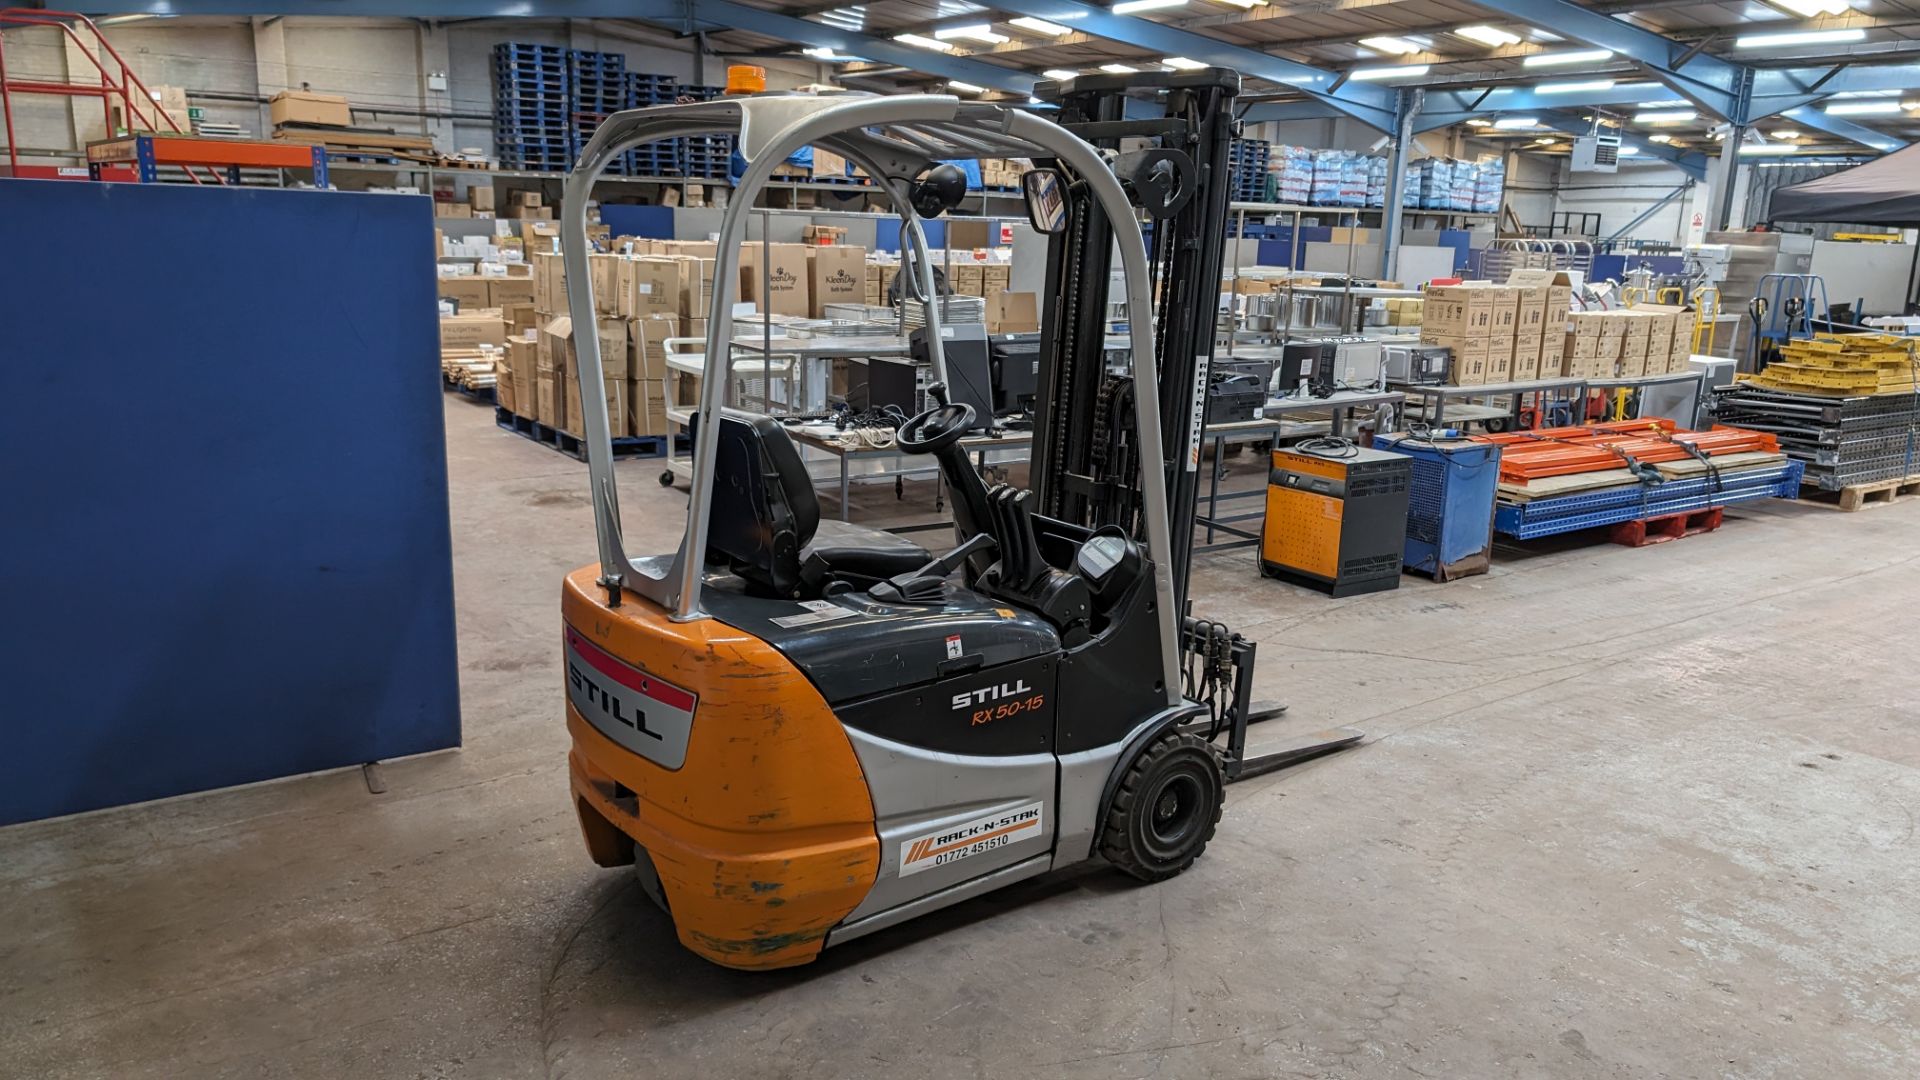 Still model RX-5015 3-wheel electric forklift truck with sideshift, 1.5 tonne capacity, including St - Bild 15 aus 18